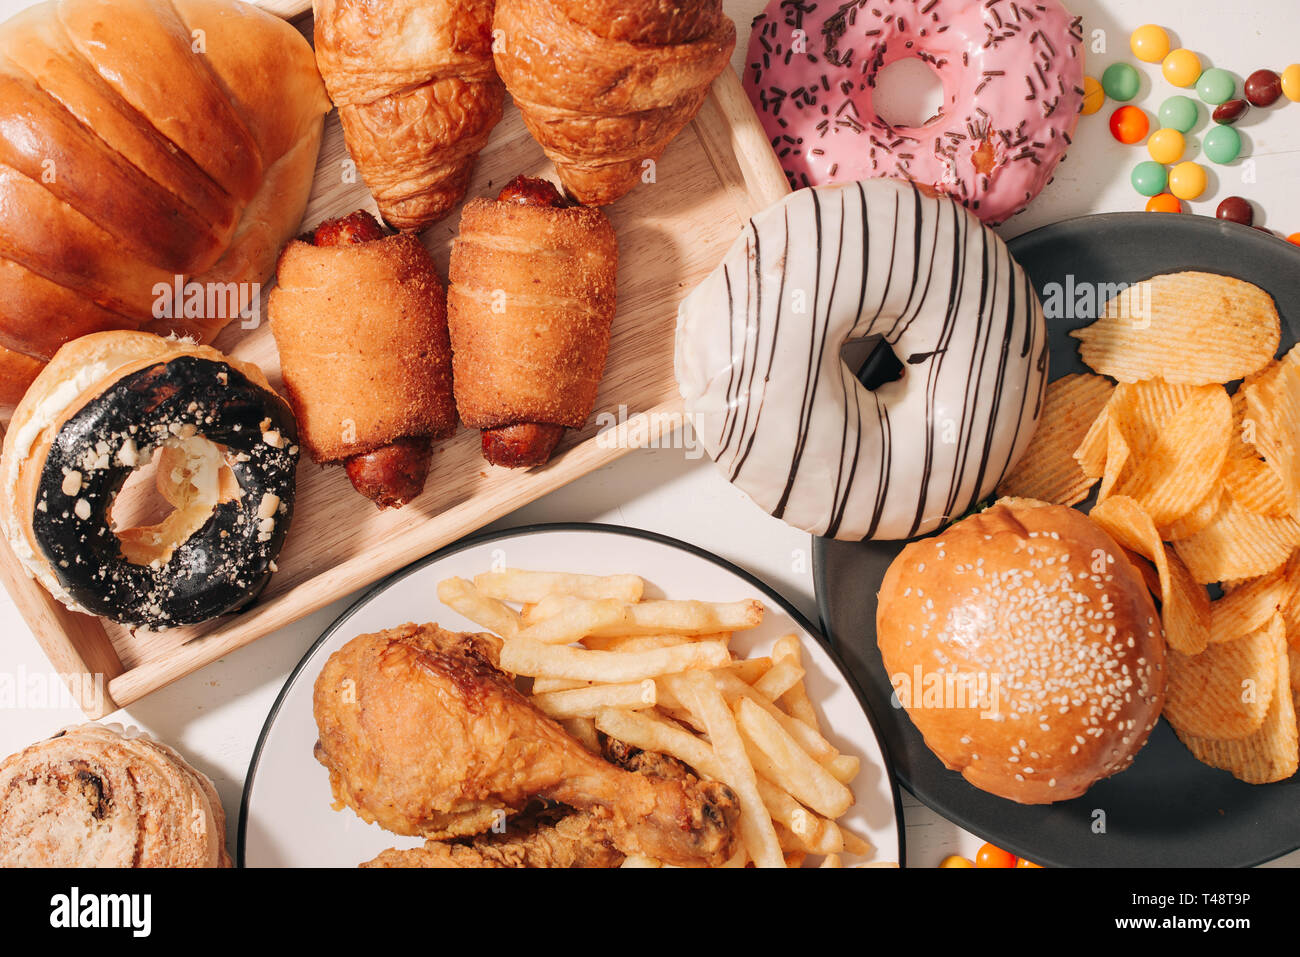 fast food and unhealthy eating concept - close up of fast food snacks and cola drink on white table Stock Photo